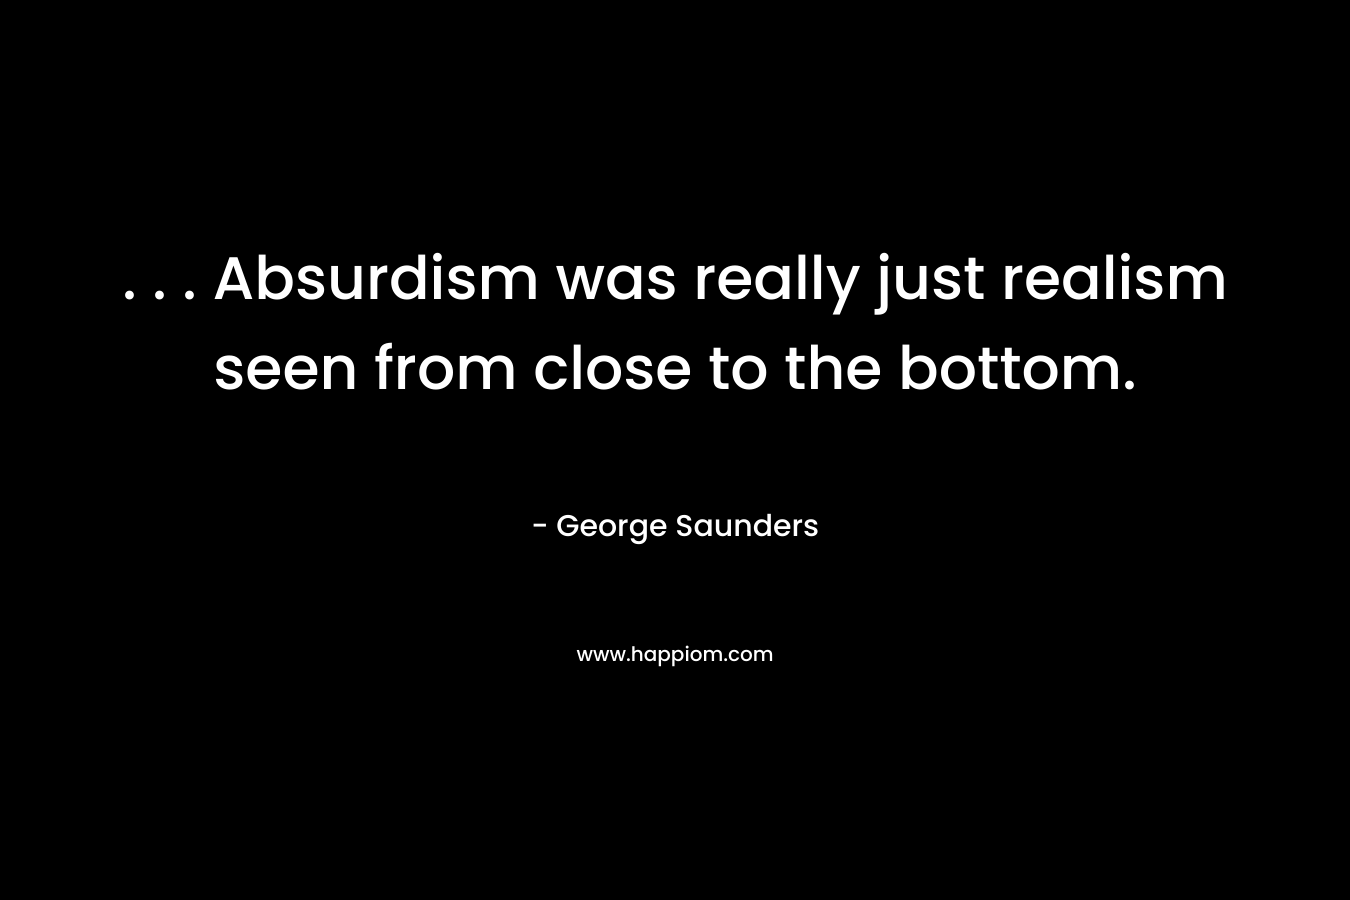 . . . Absurdism was really just realism seen from close to the bottom. – George Saunders